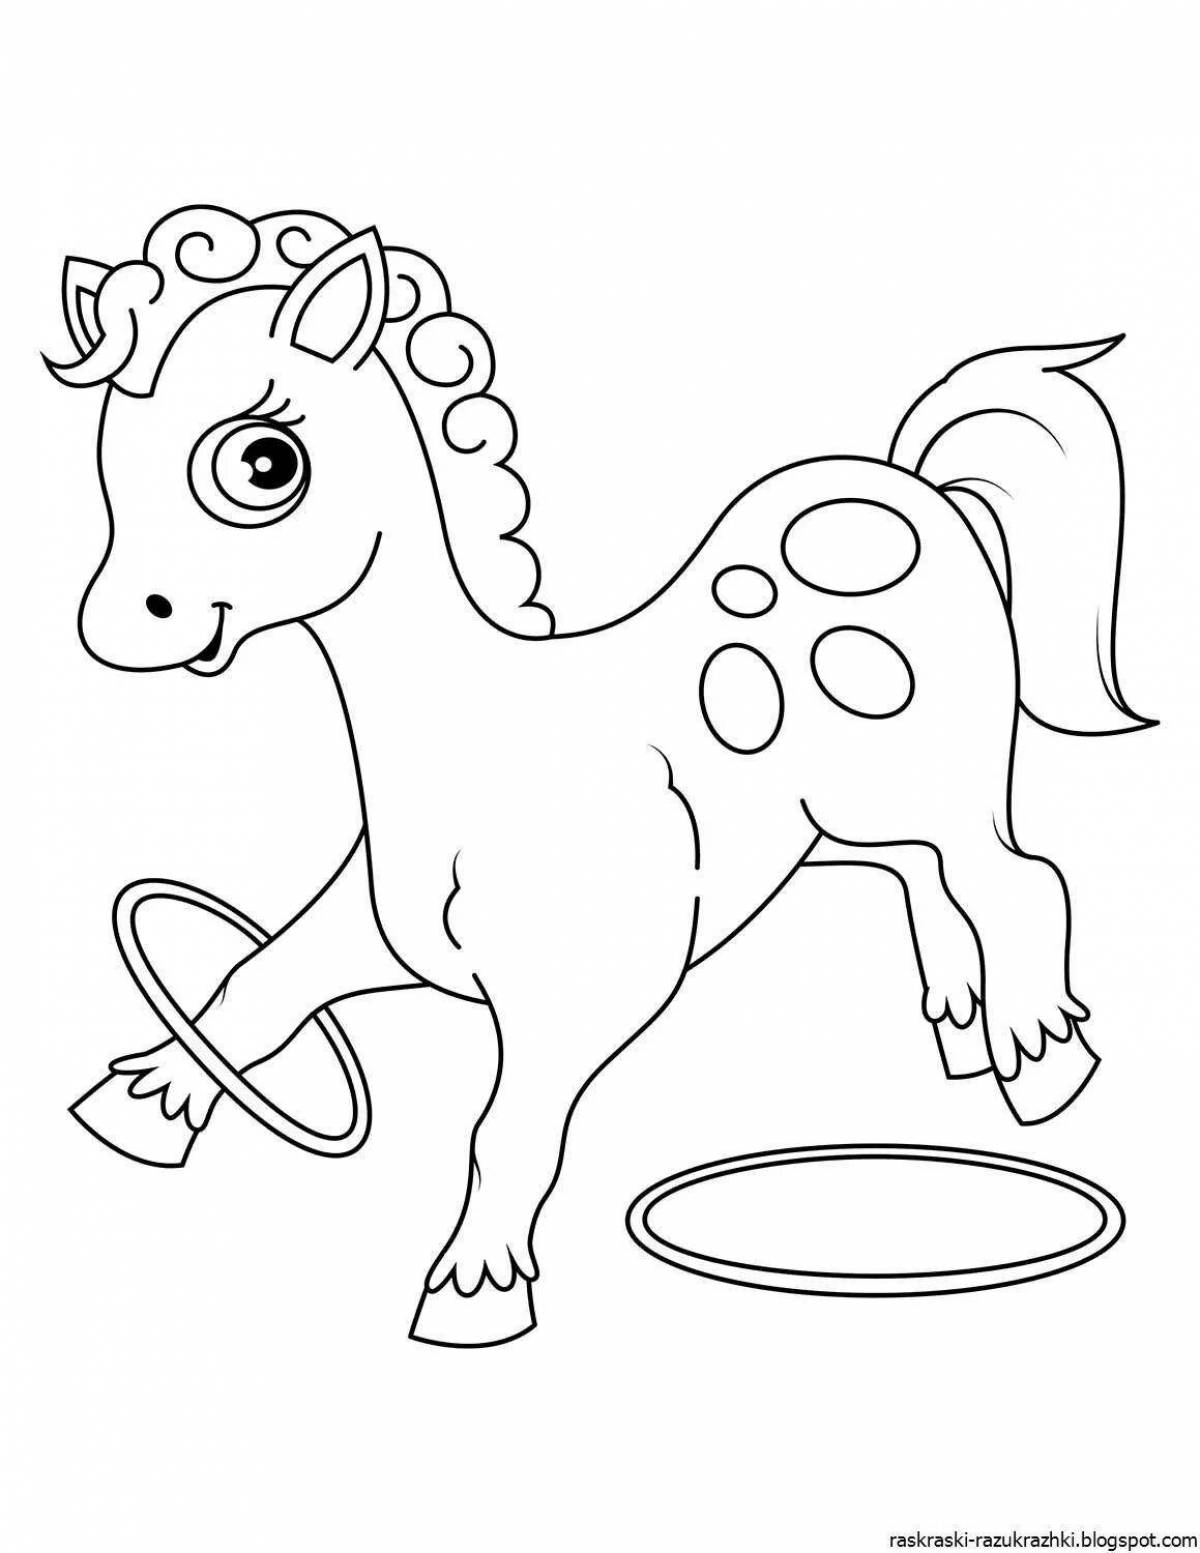 Animated drawing of a horse for children